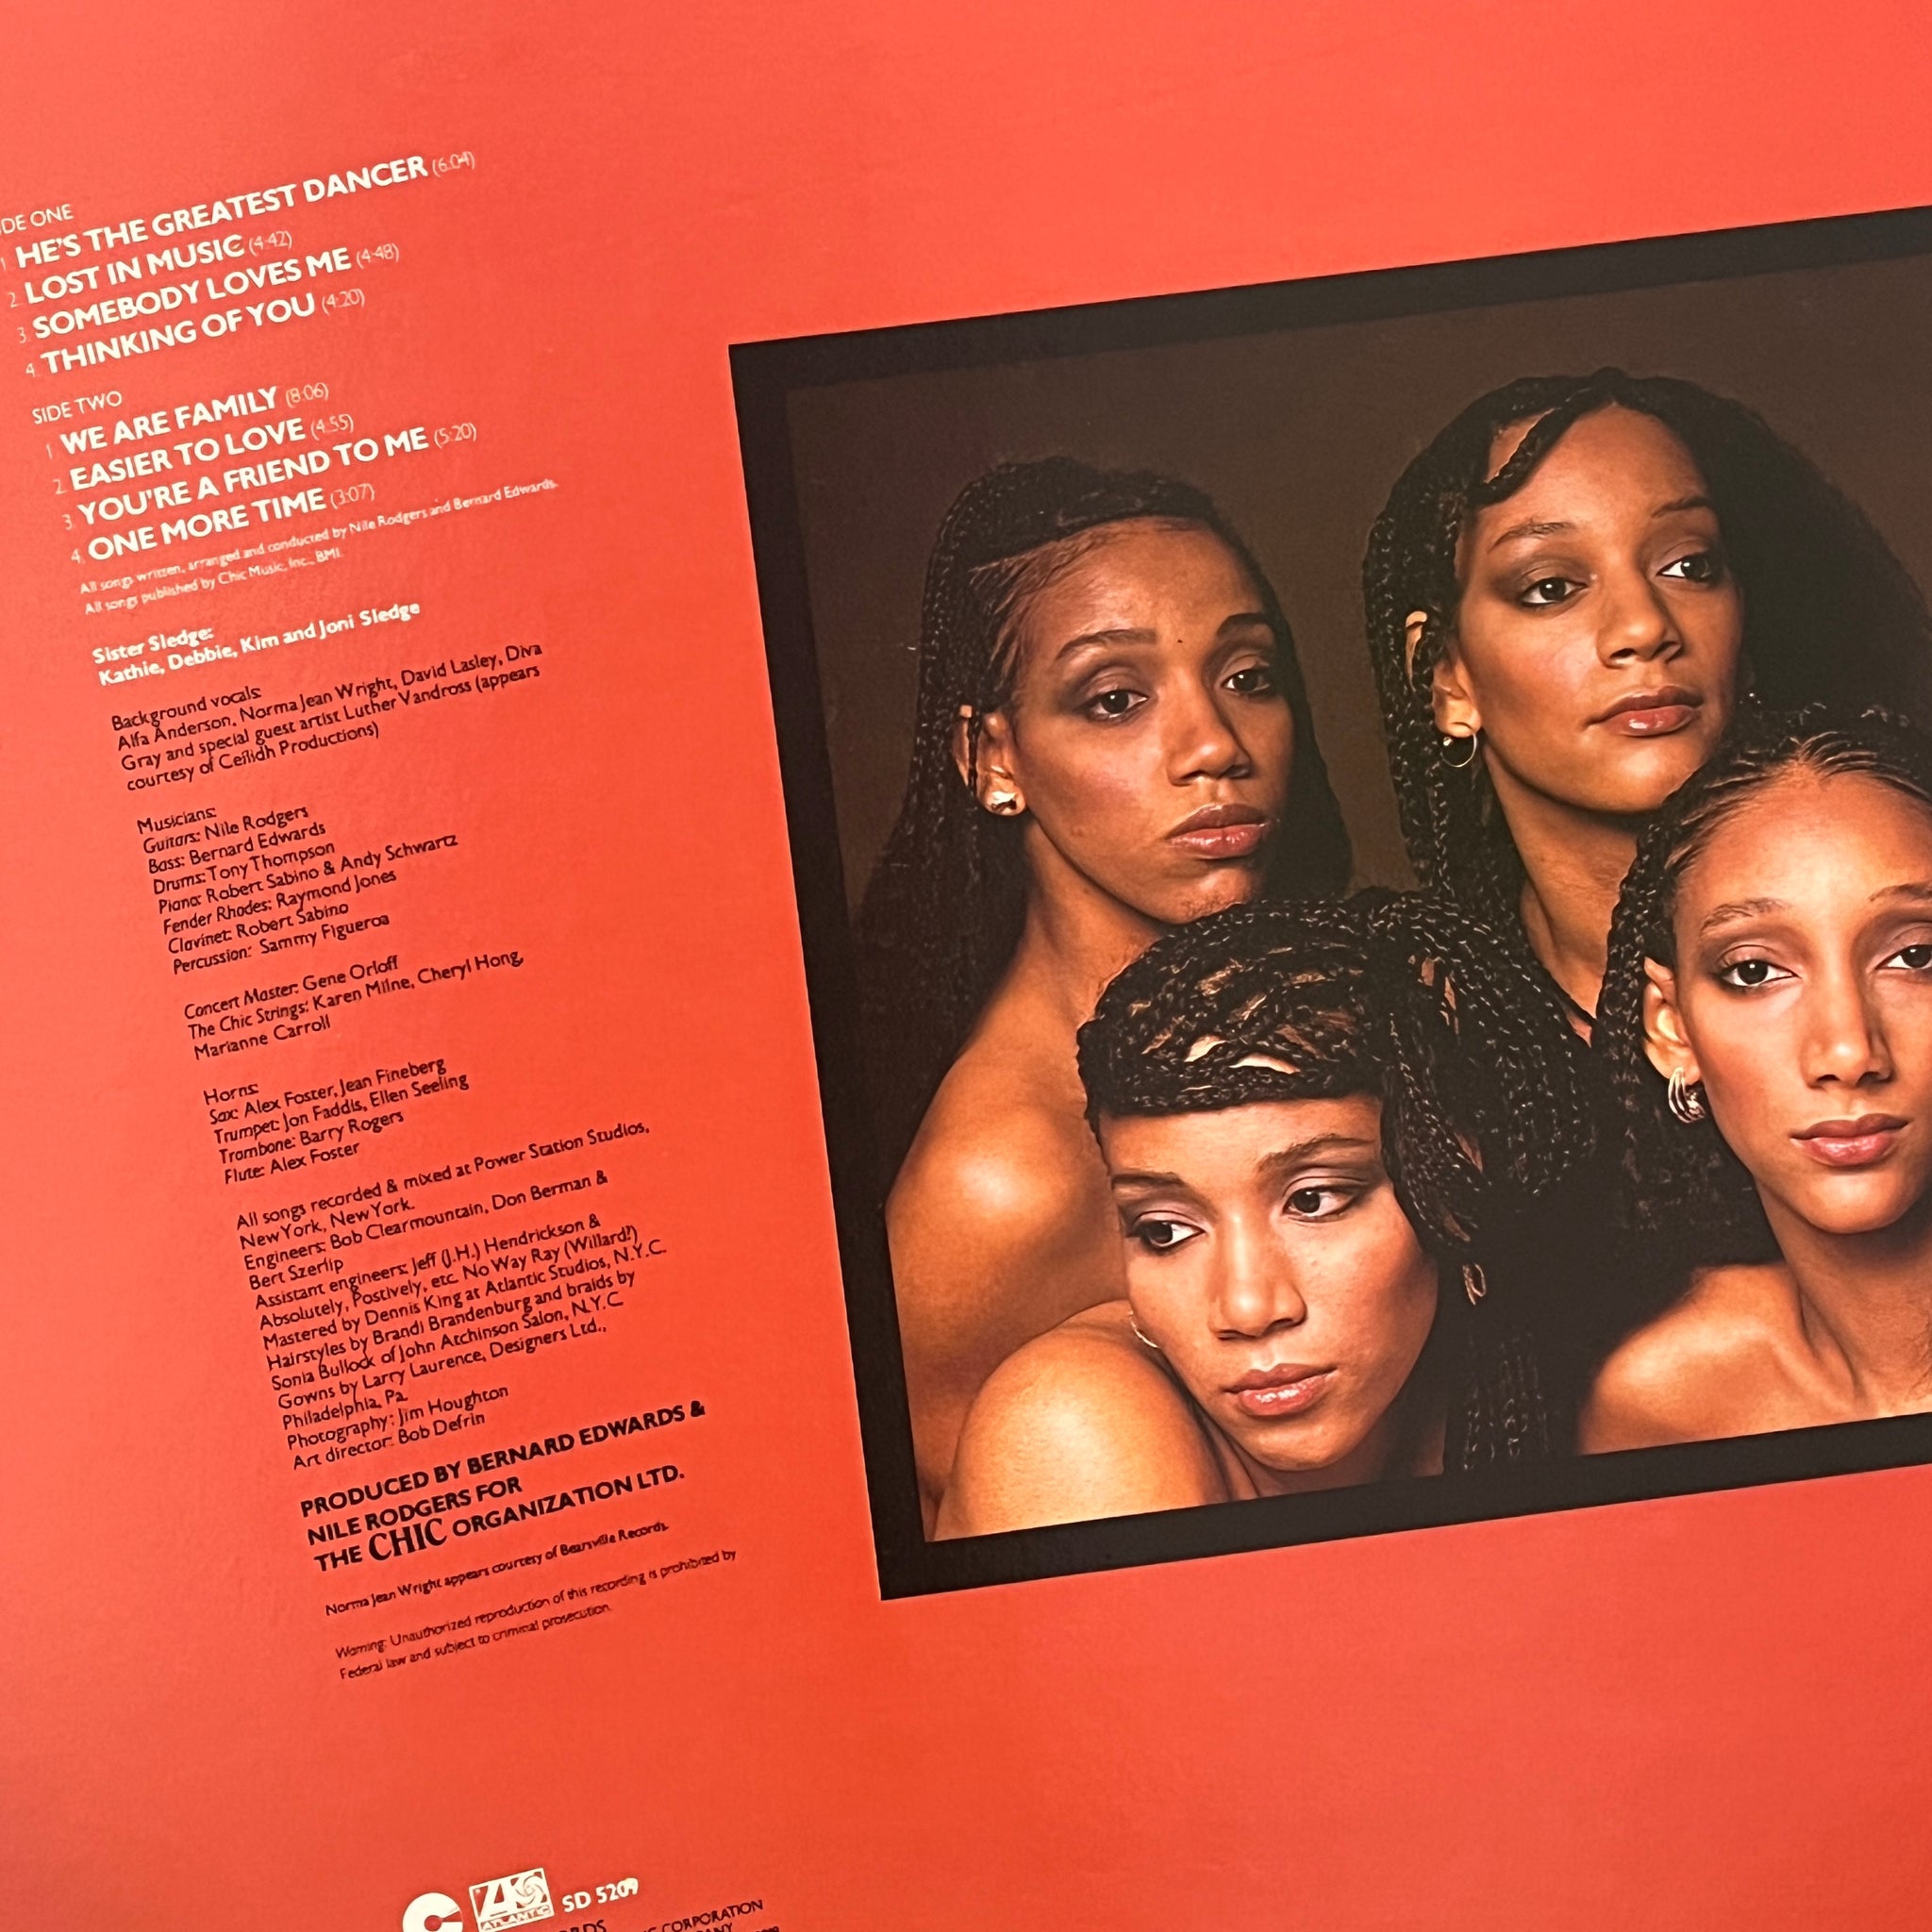 Sister Sledge – We Are Family